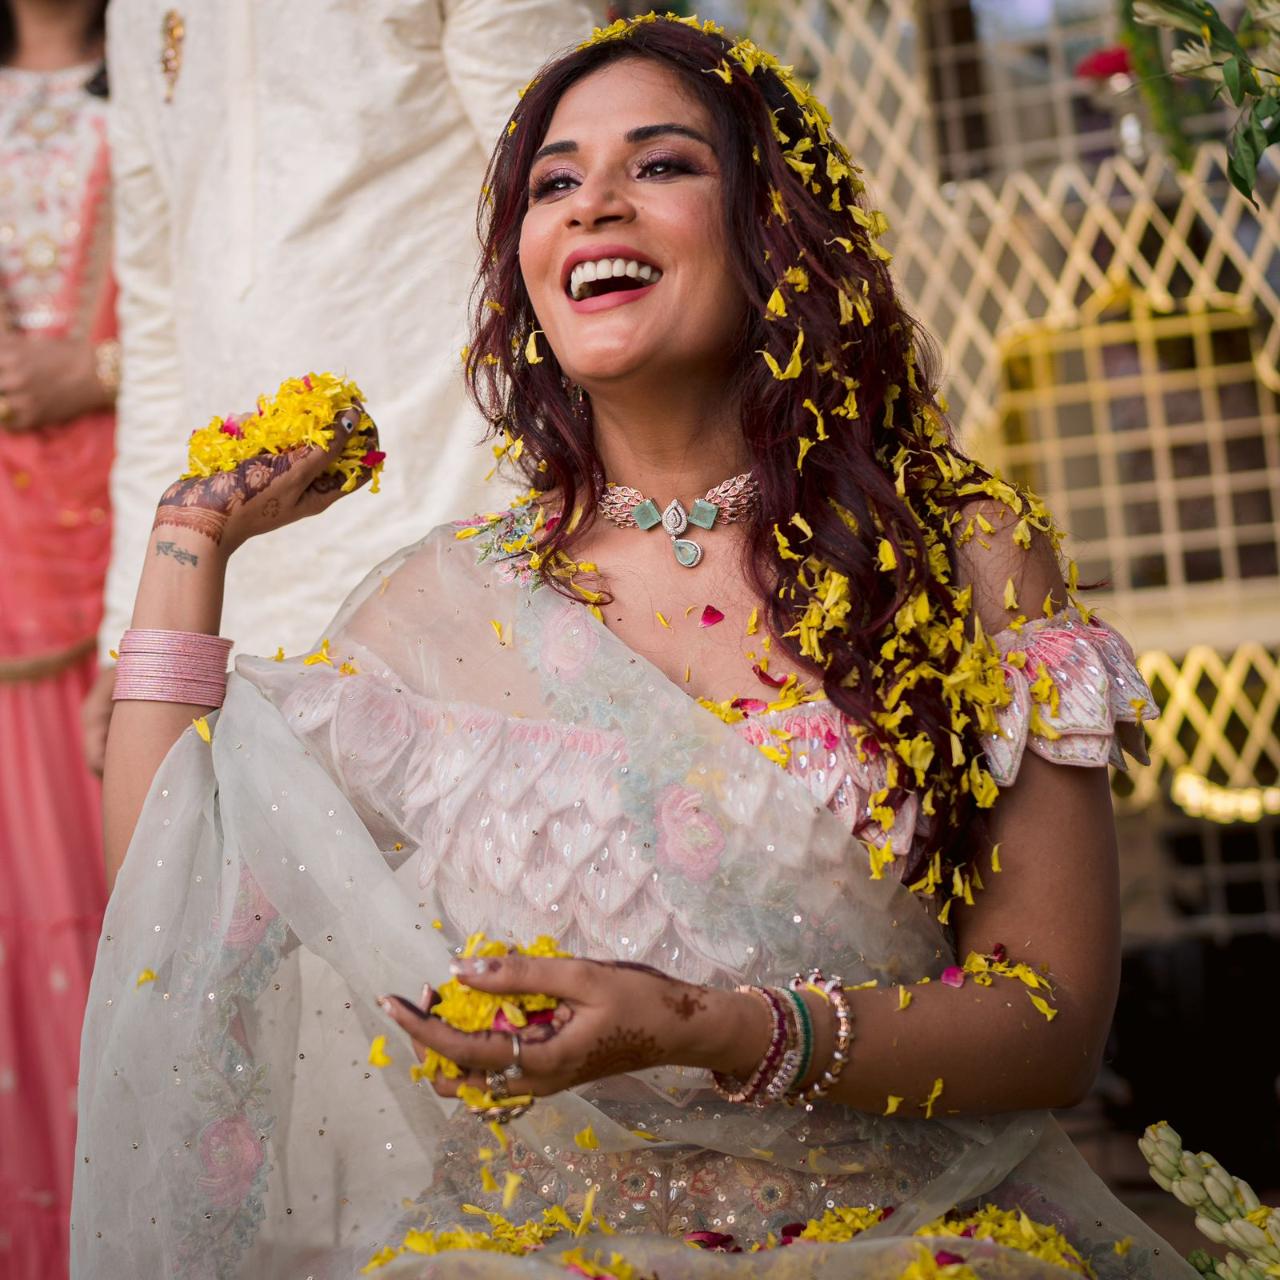  The couple did a fun “phoolon Ki holi” as their friends and family showered them in a customary way. This was followed by mehendi for Richa and her friends in a colorful set up